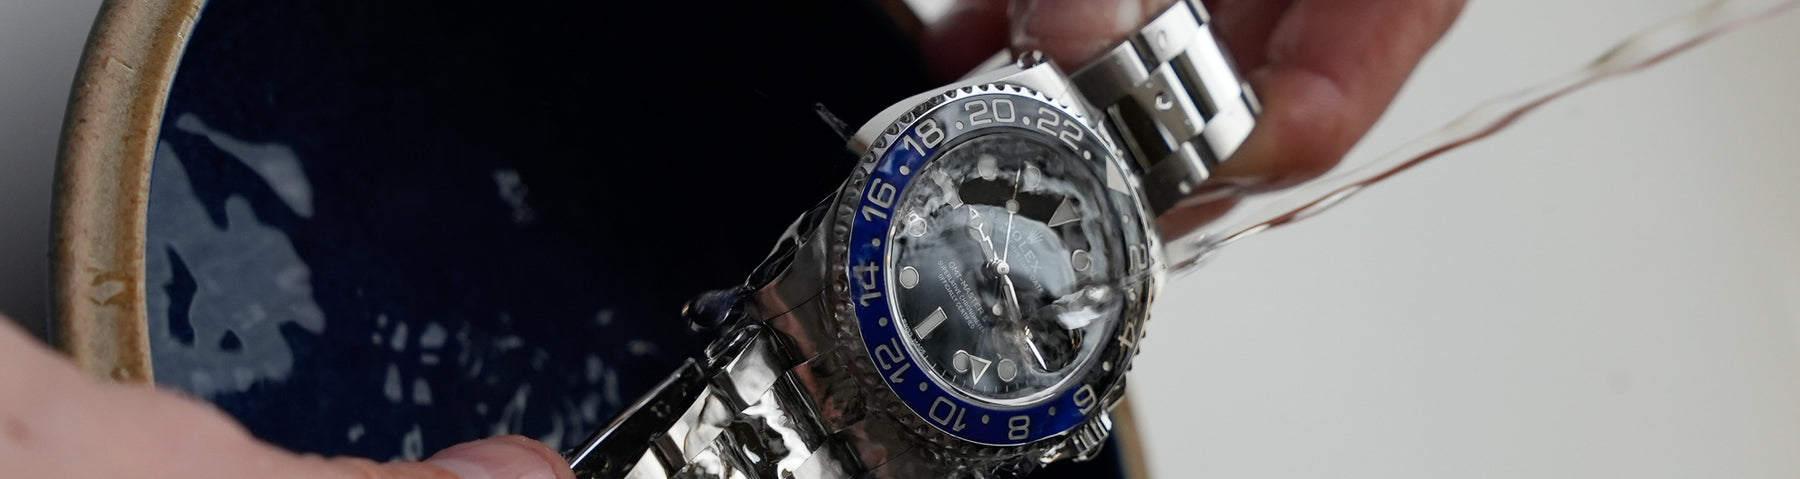 DIY: Caring for your Rolex Watch